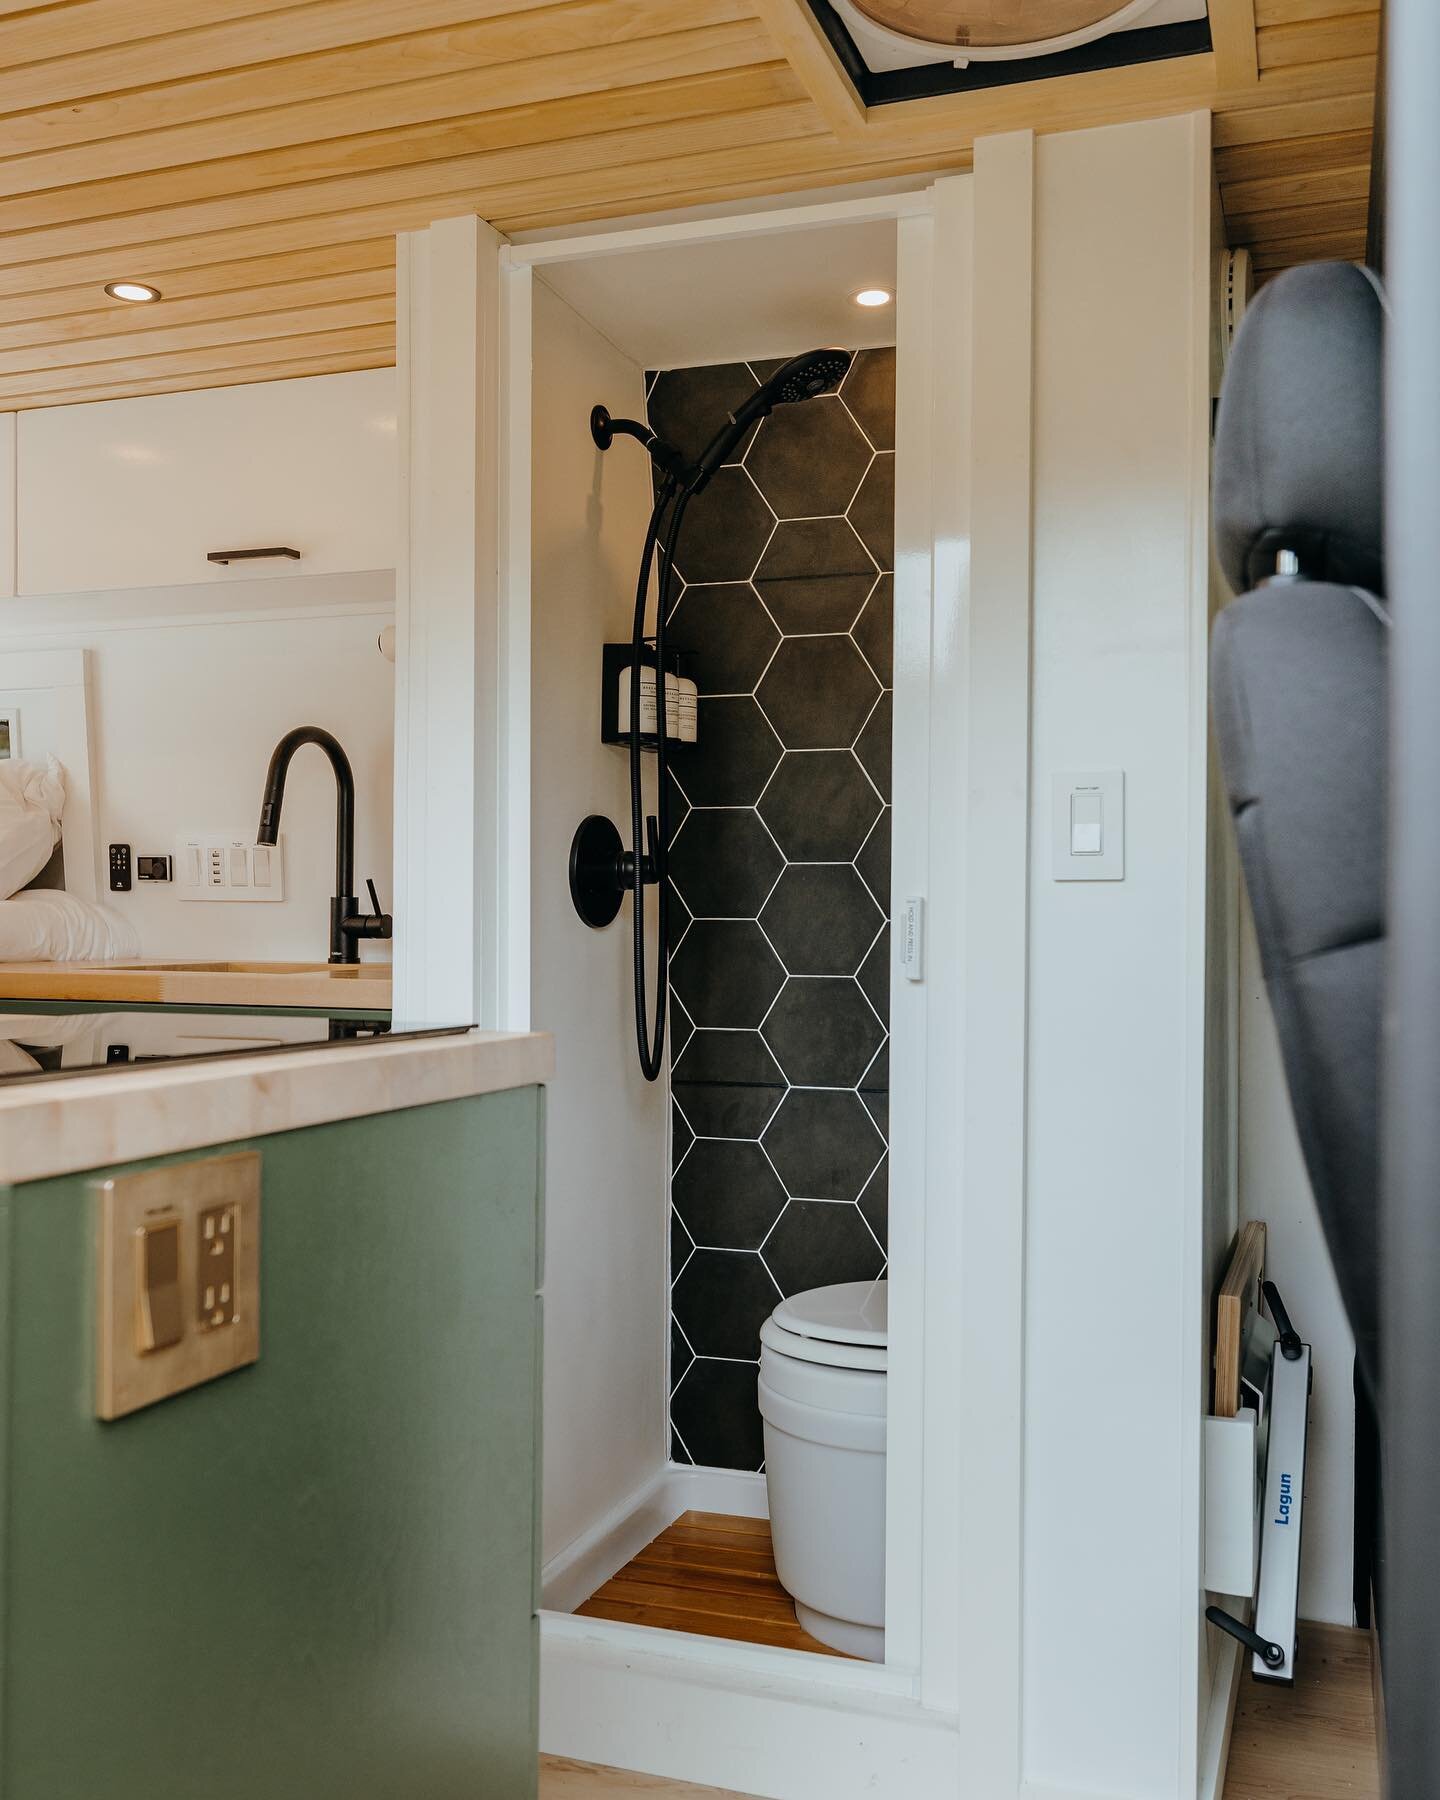 Indulge in van life luxury with Noma&rsquo;s full bathrooms 🚿✨

Our thoughtfully designed bathrooms offer the utmost convenience for your on-the-go lifestyle. 

Experience the pinnacle of van life bathroom perfection:
✅ Full-size dry flush toilet - 